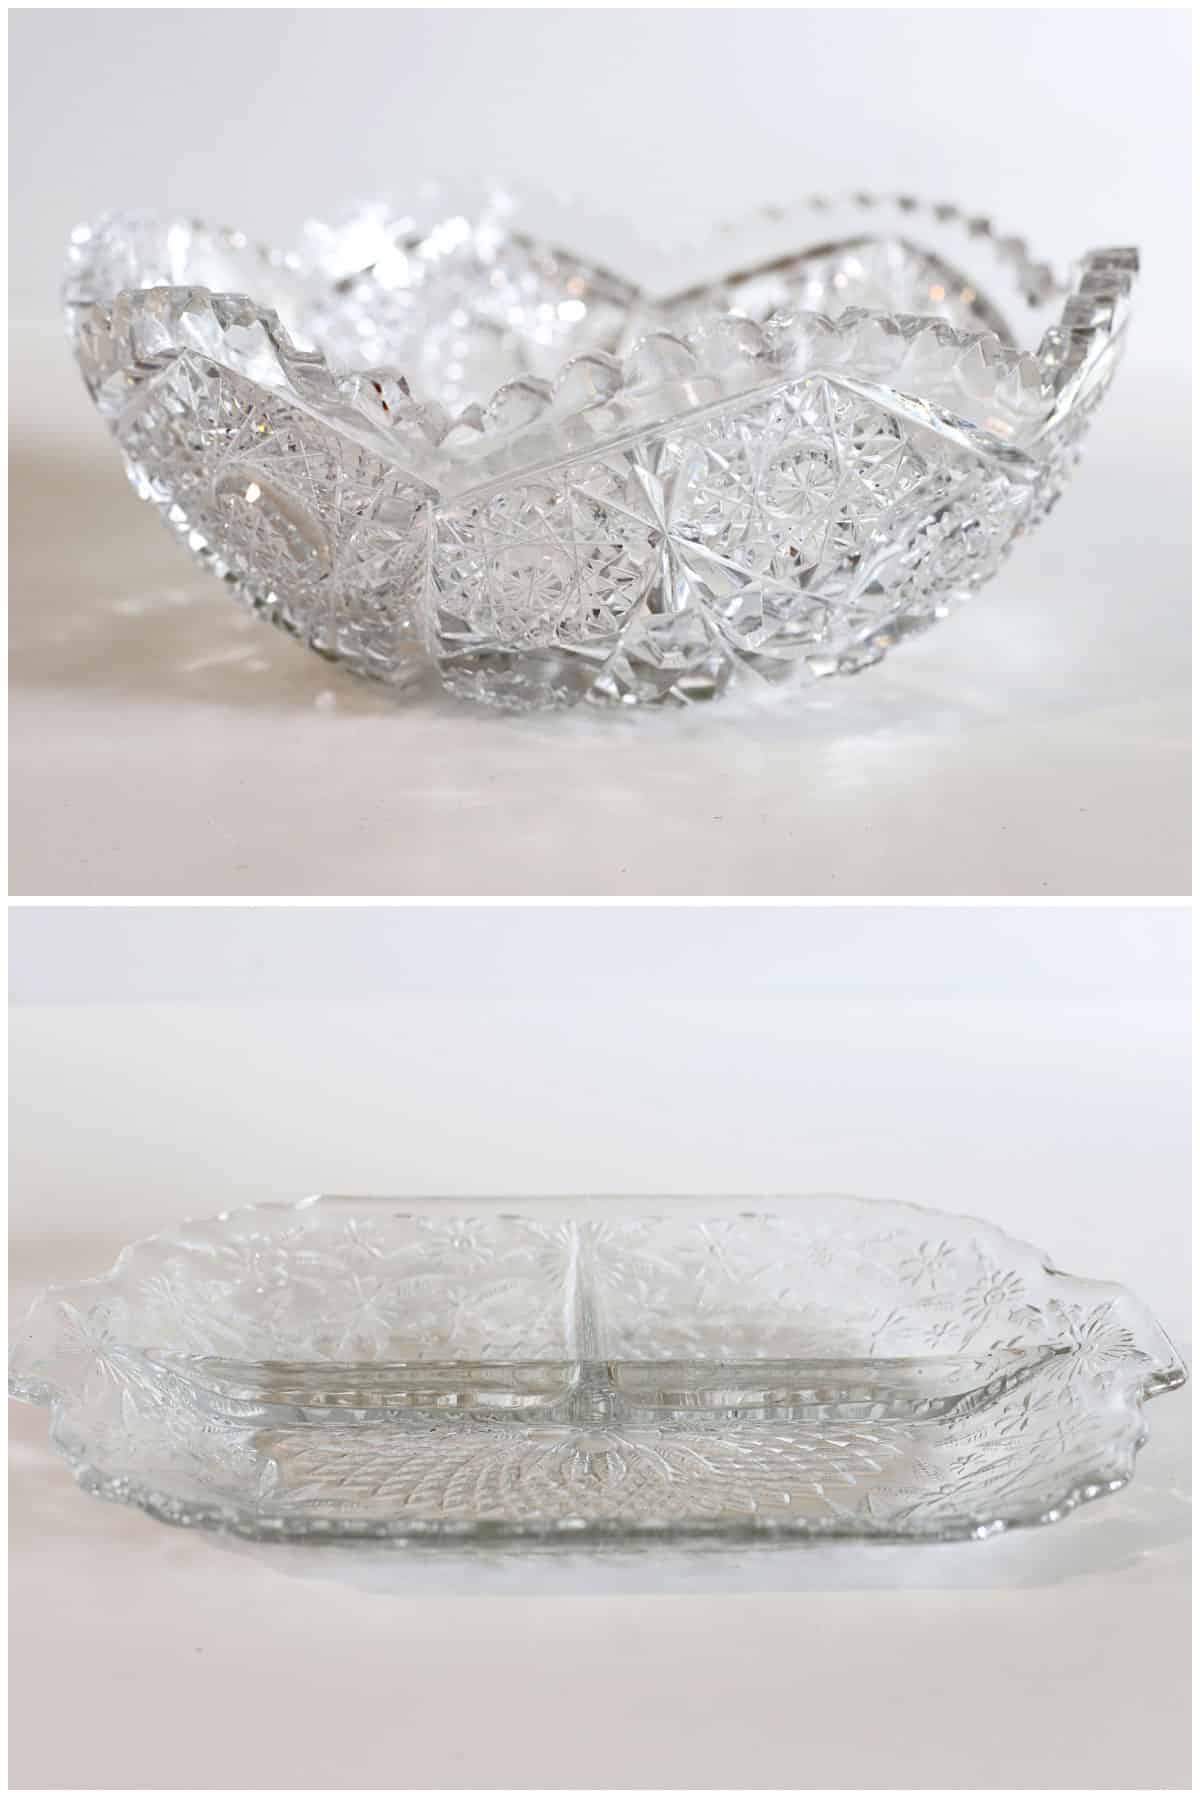 Showing the difference between cut glass and pressed glass - using a cut glass serving bowl and a pressed glass divided serving dish.